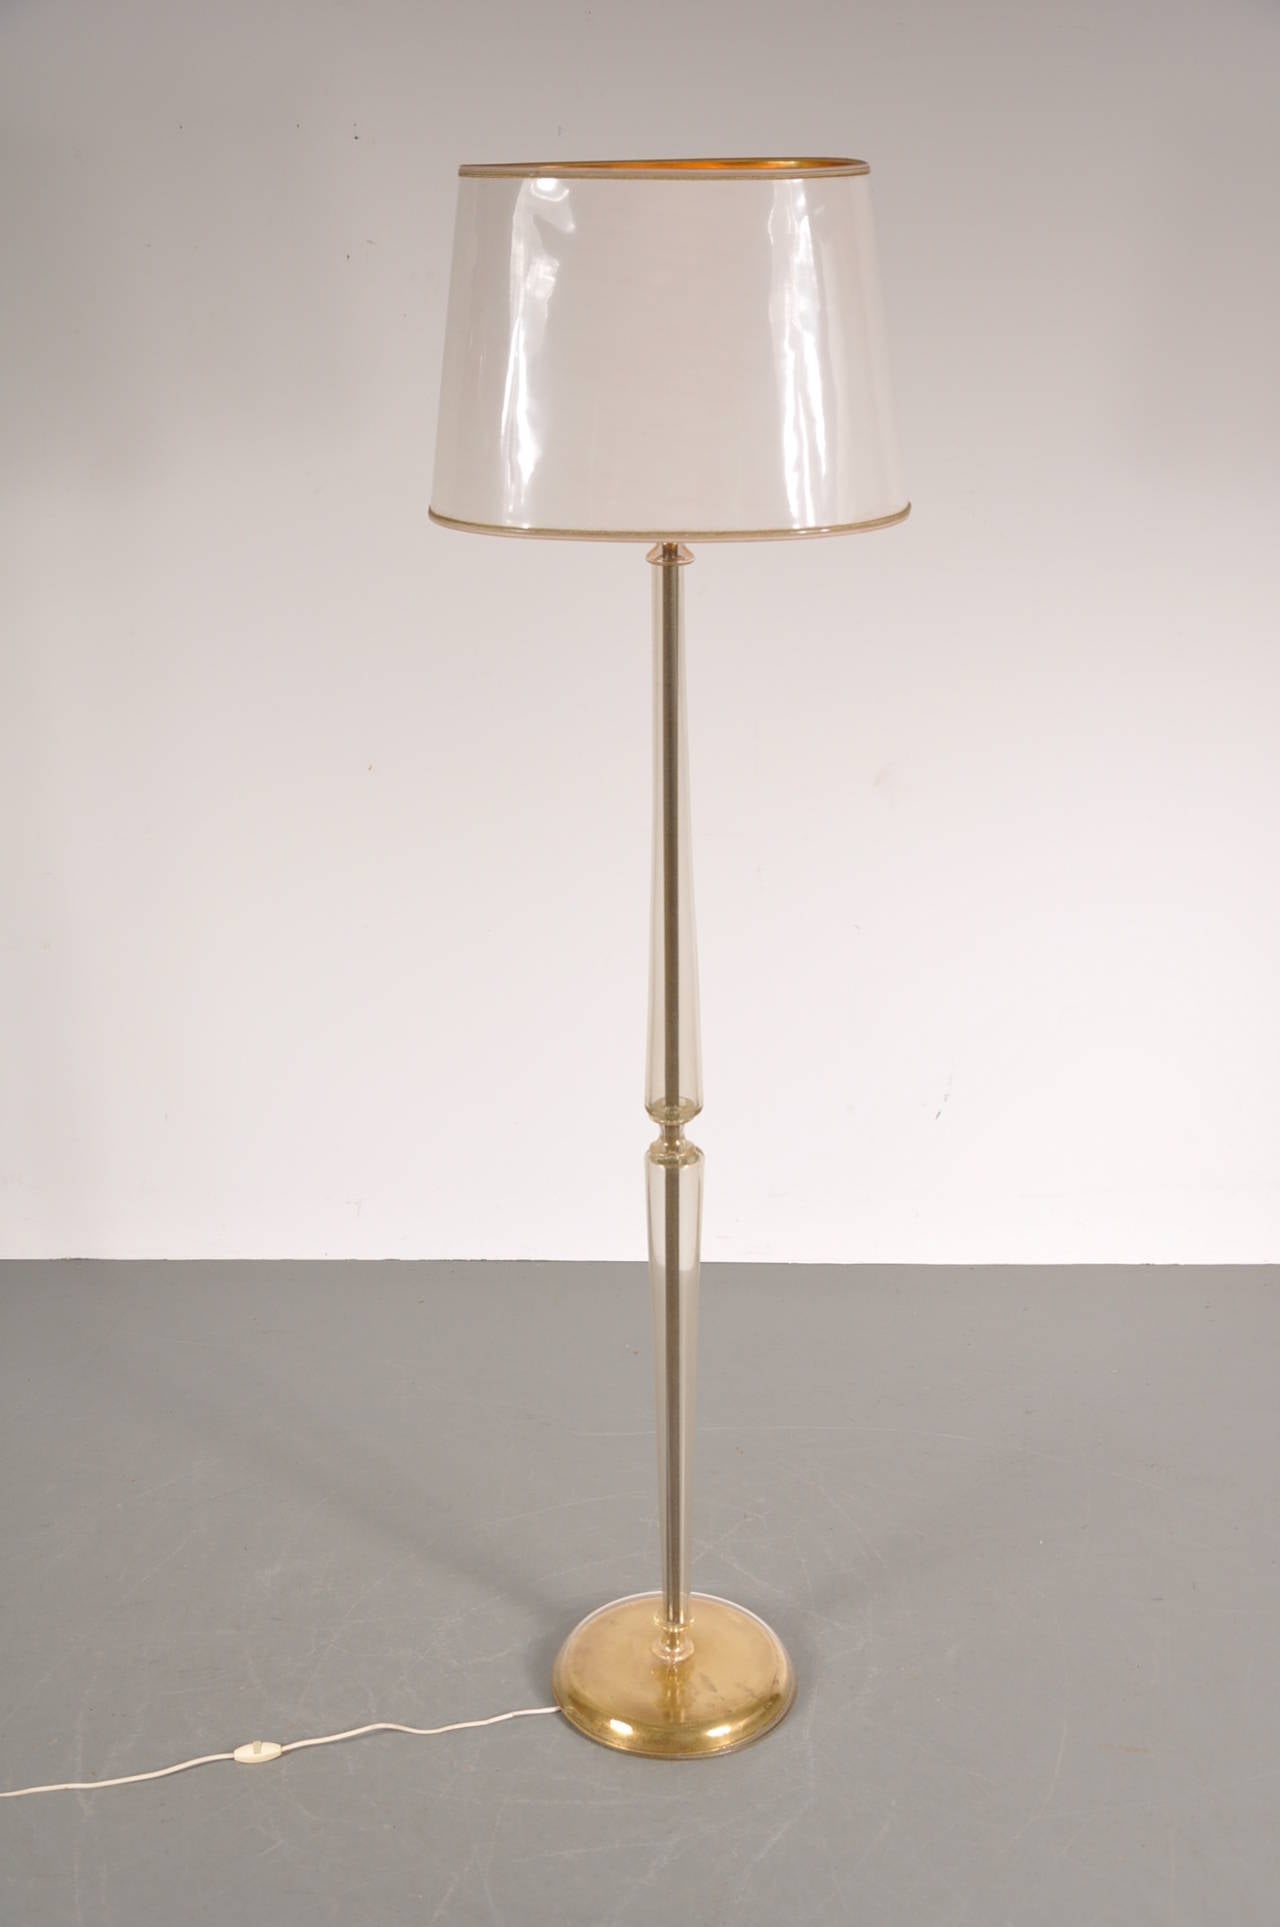 Murano Glass Floor Lamp in the Manner of Barovier e Toso, circa 1940 For Sale 2